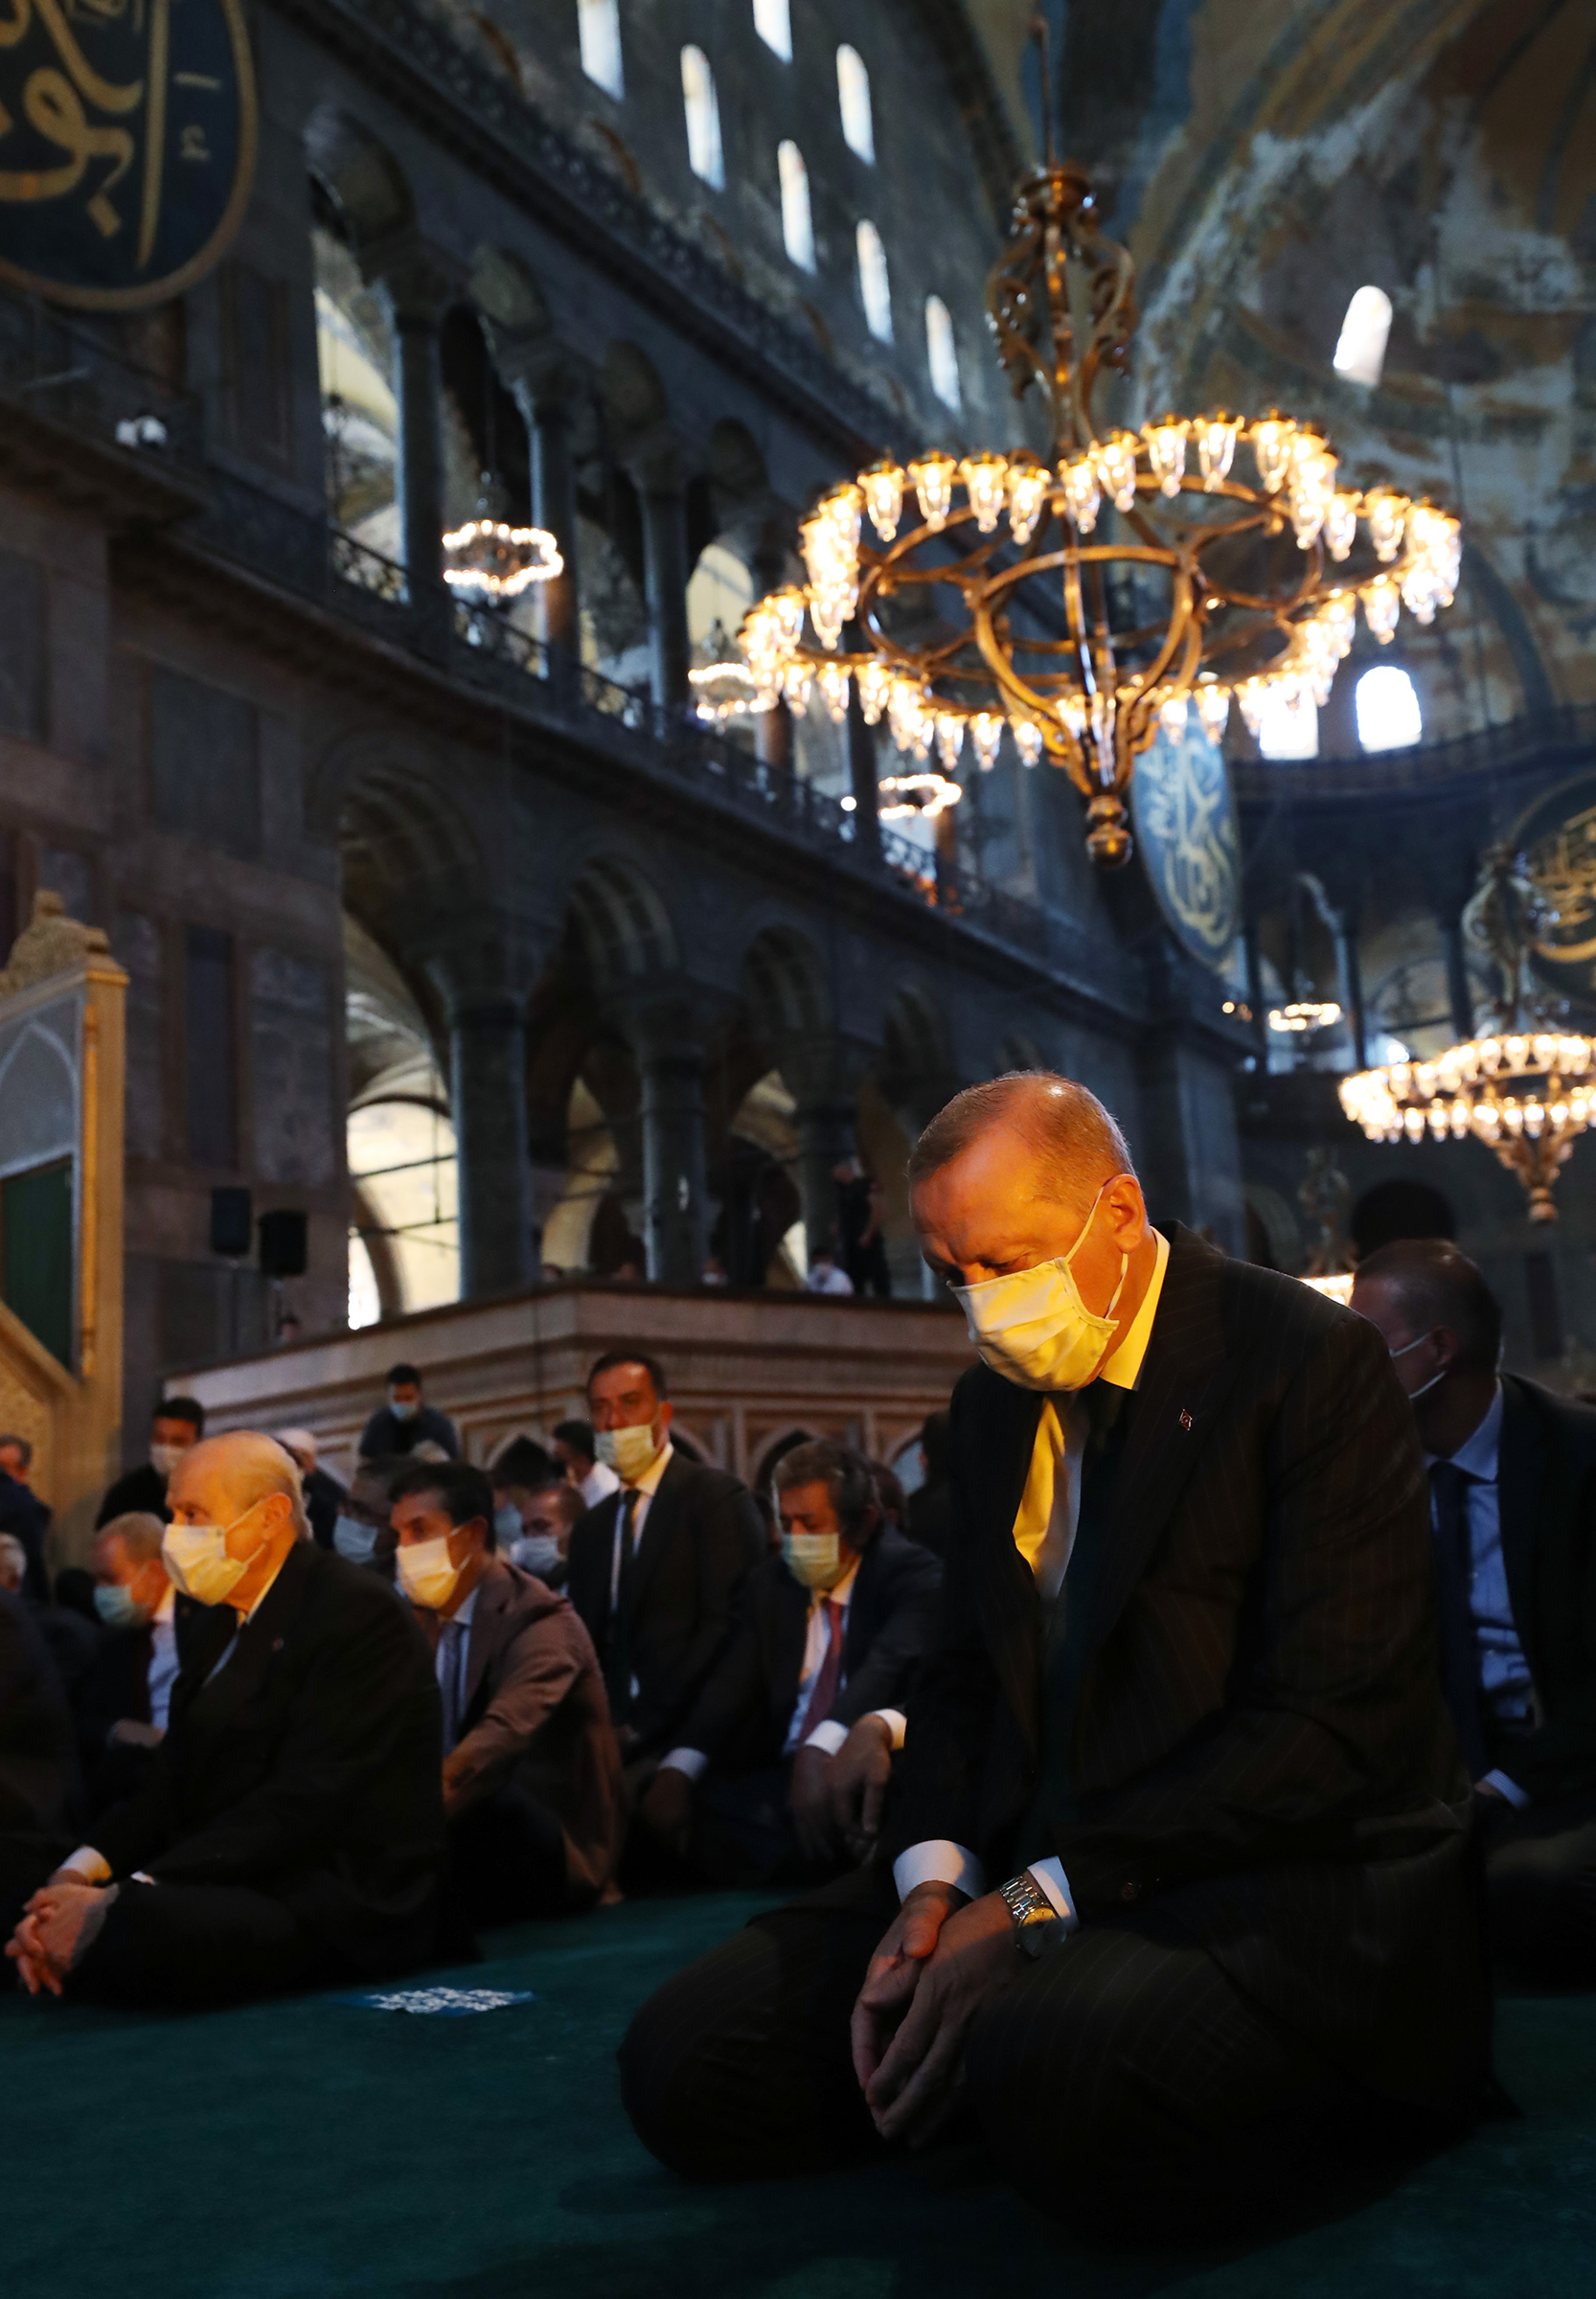 Turkey's President Recep Tayyip Erdogan (C) and invited guests attend Friday prayers at Hagia Sophia during the first official prayers after being reconverted into a mosque on July 24 (Handout/Turkish Presidential Press Office/Getty Images)